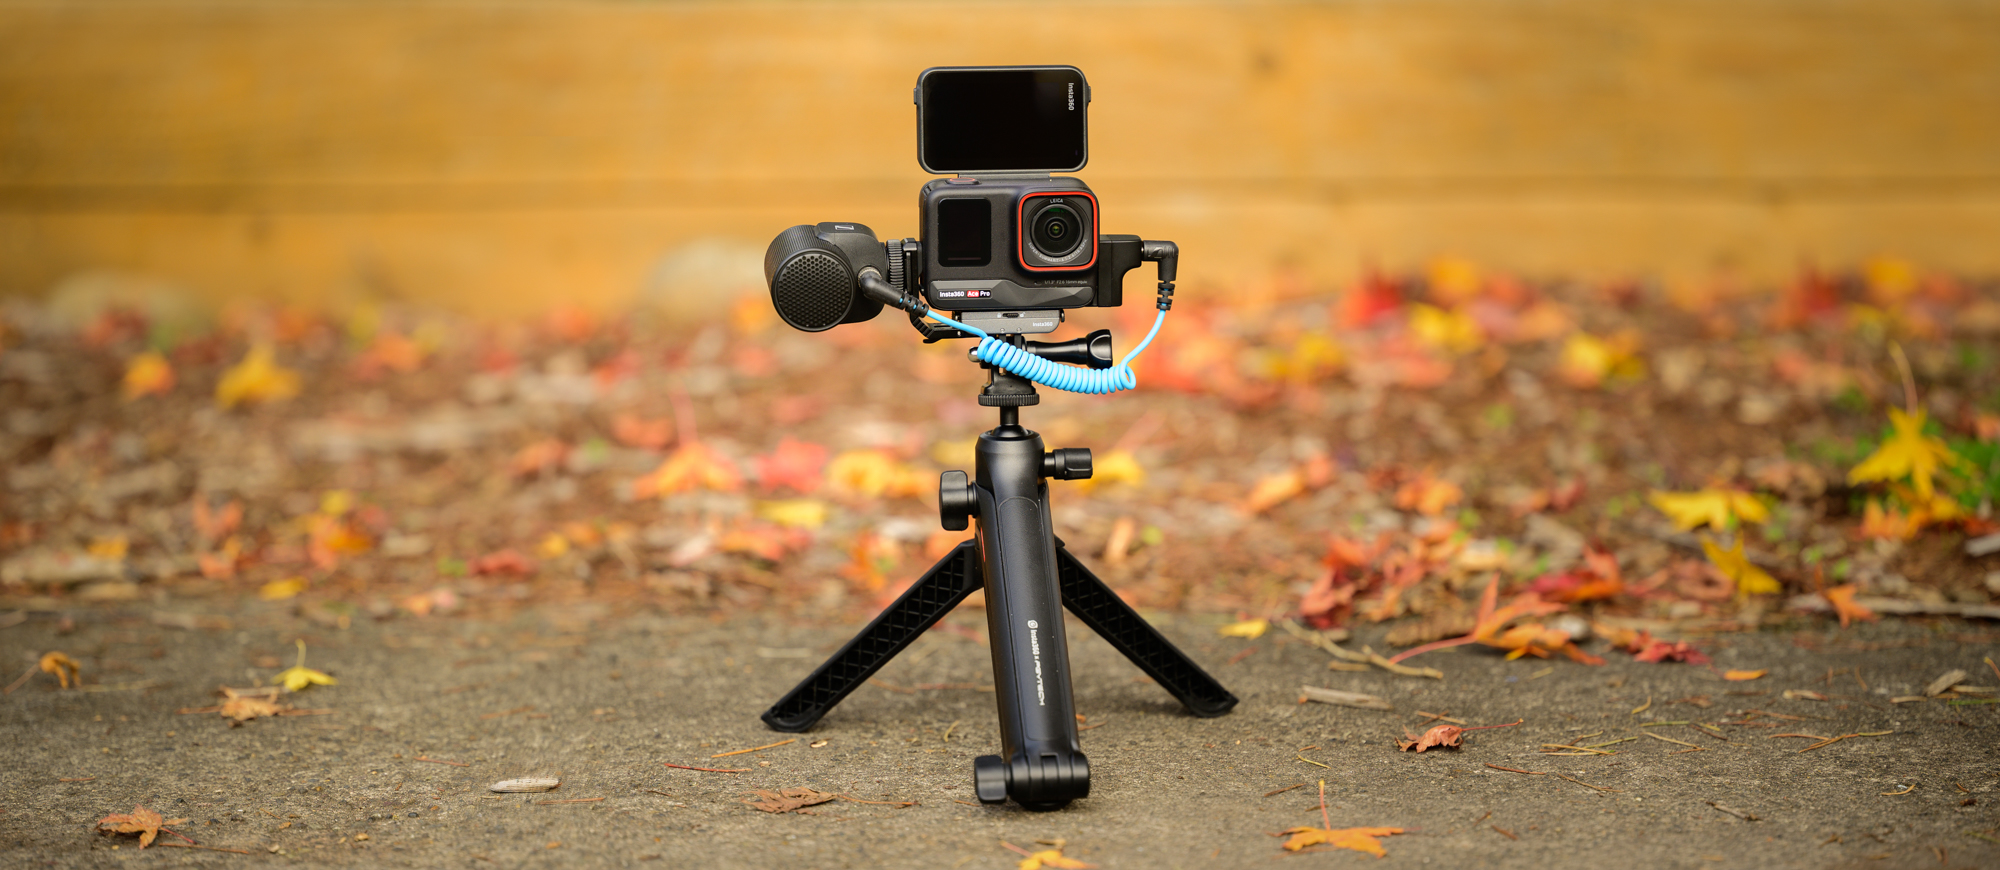 GoPro camera rig creates awesome-dude effects